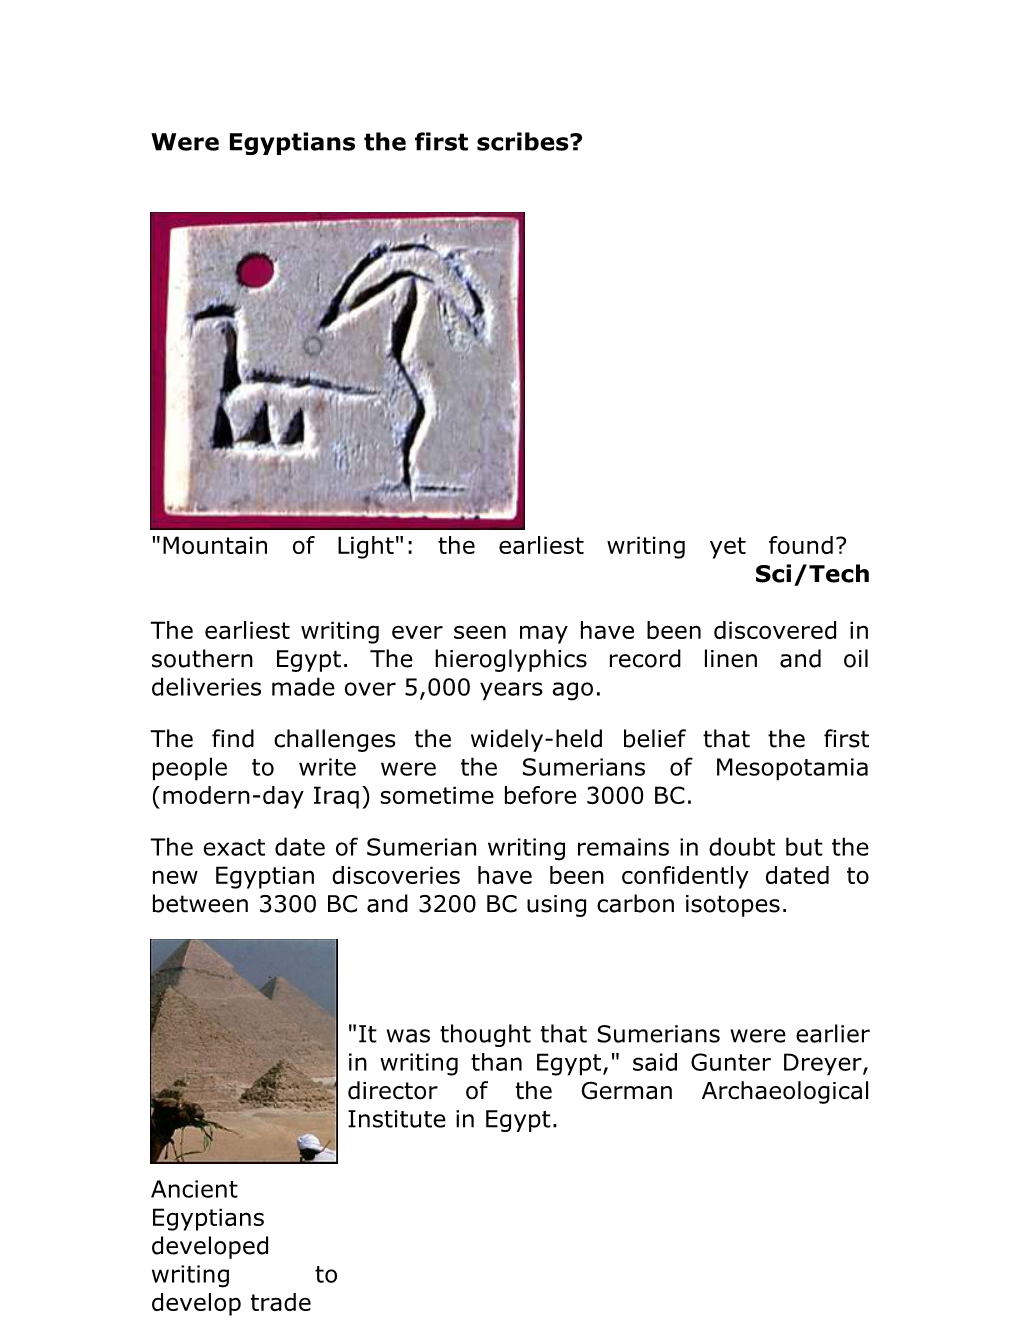 Were Egyptians the First Scribes?